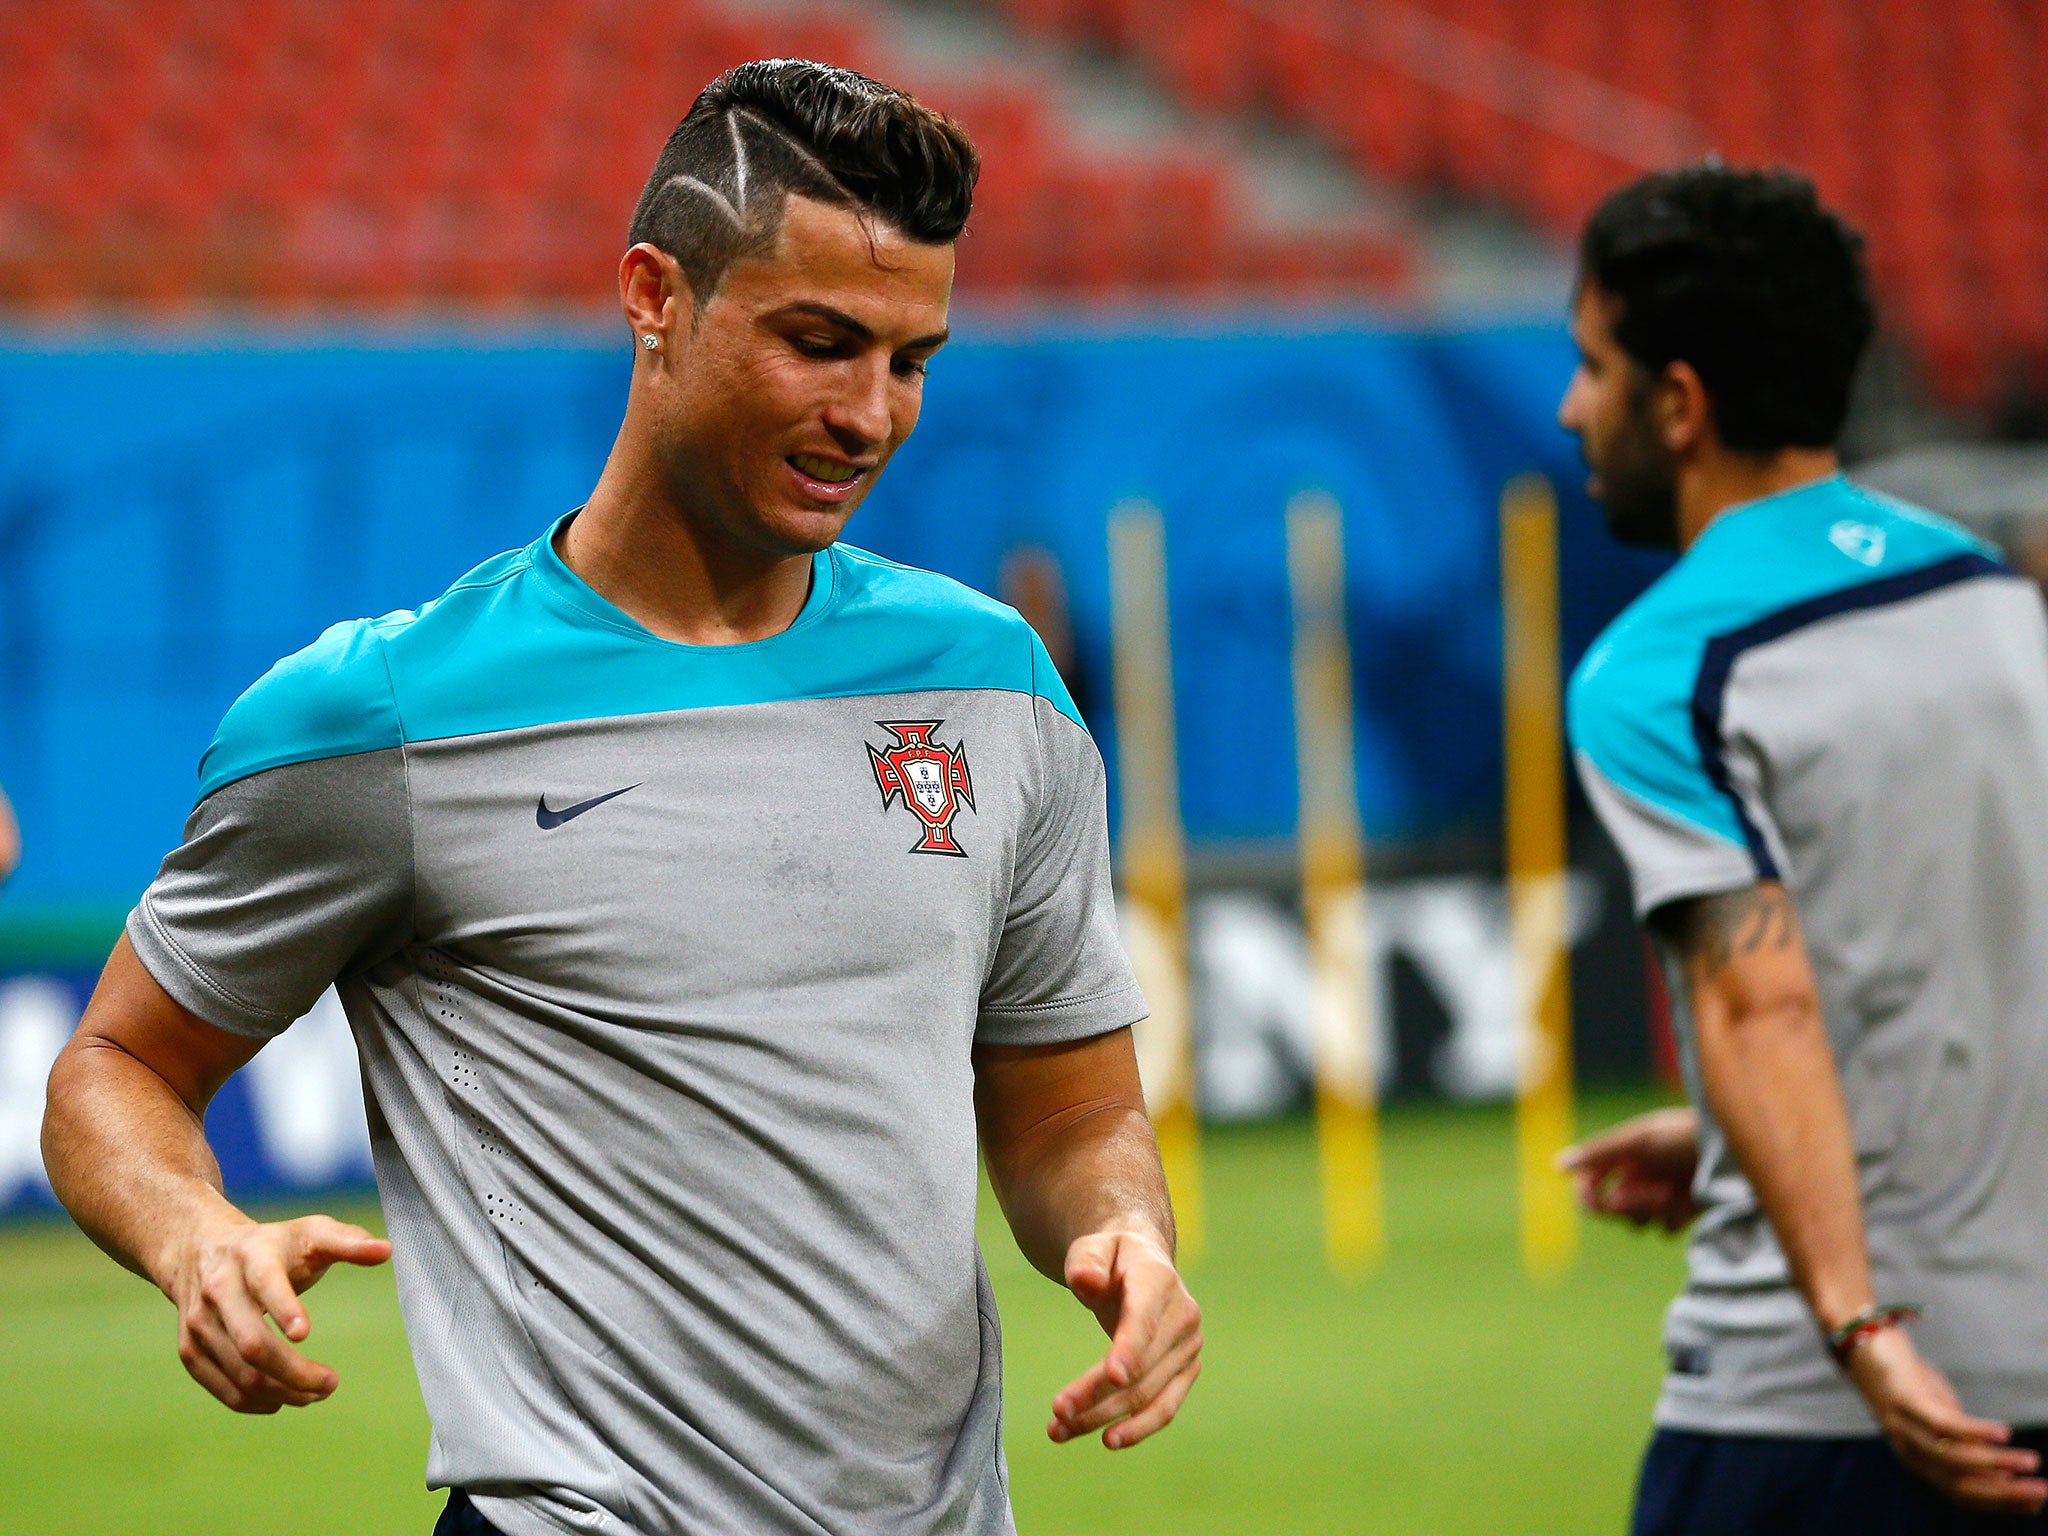 Cristiano Ronaldo sports a dodgy new haircut for USA game... but is it